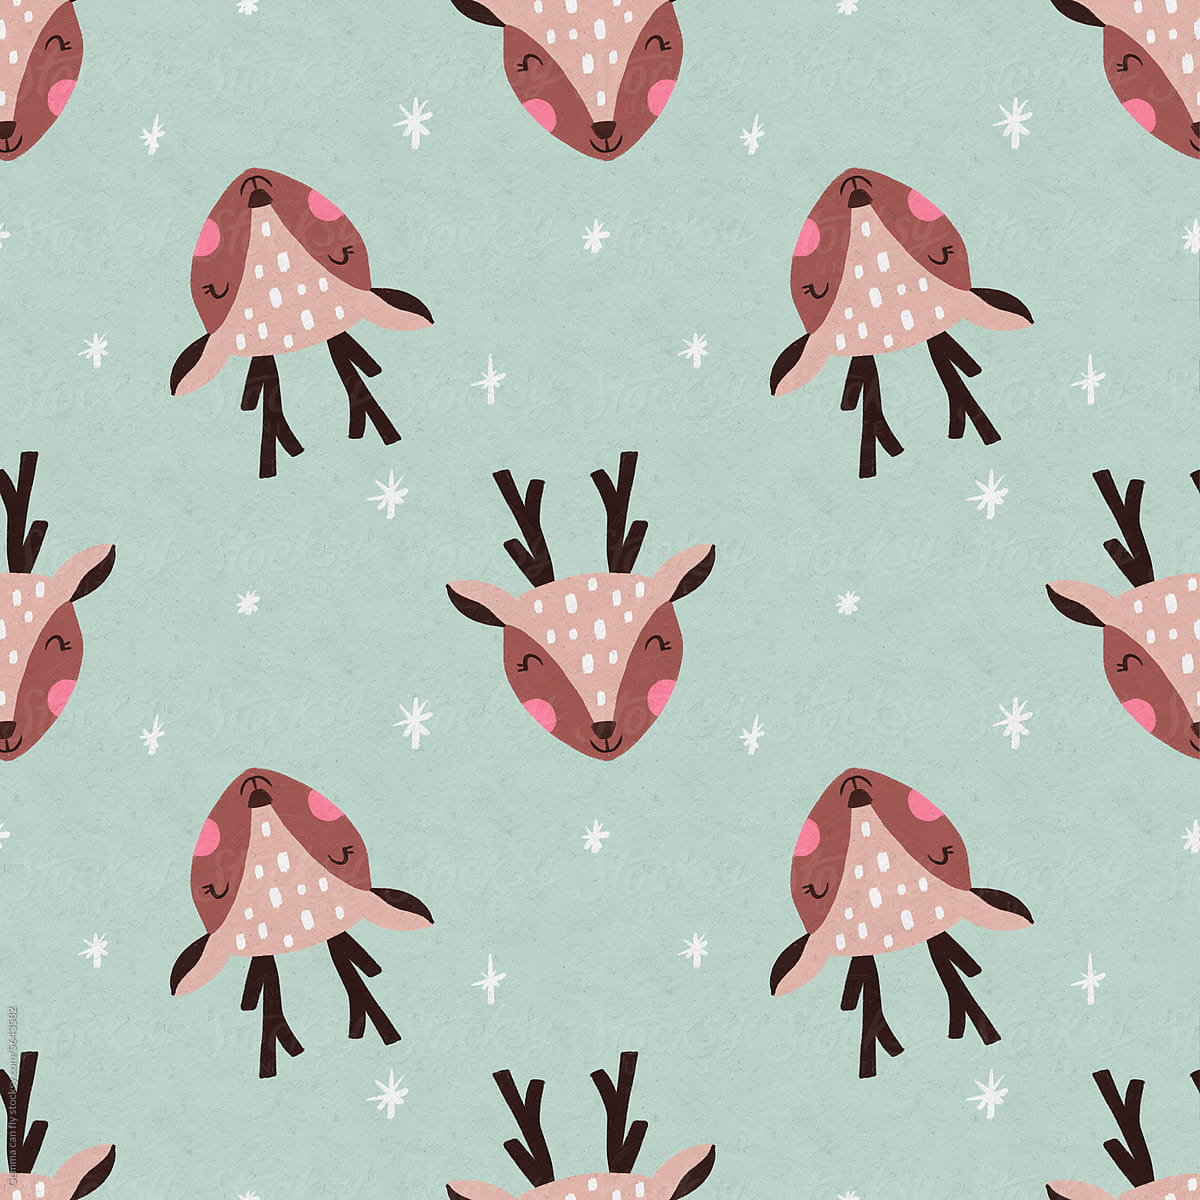 Happy reindeer with snow, seamless pattern. Christmas illustration